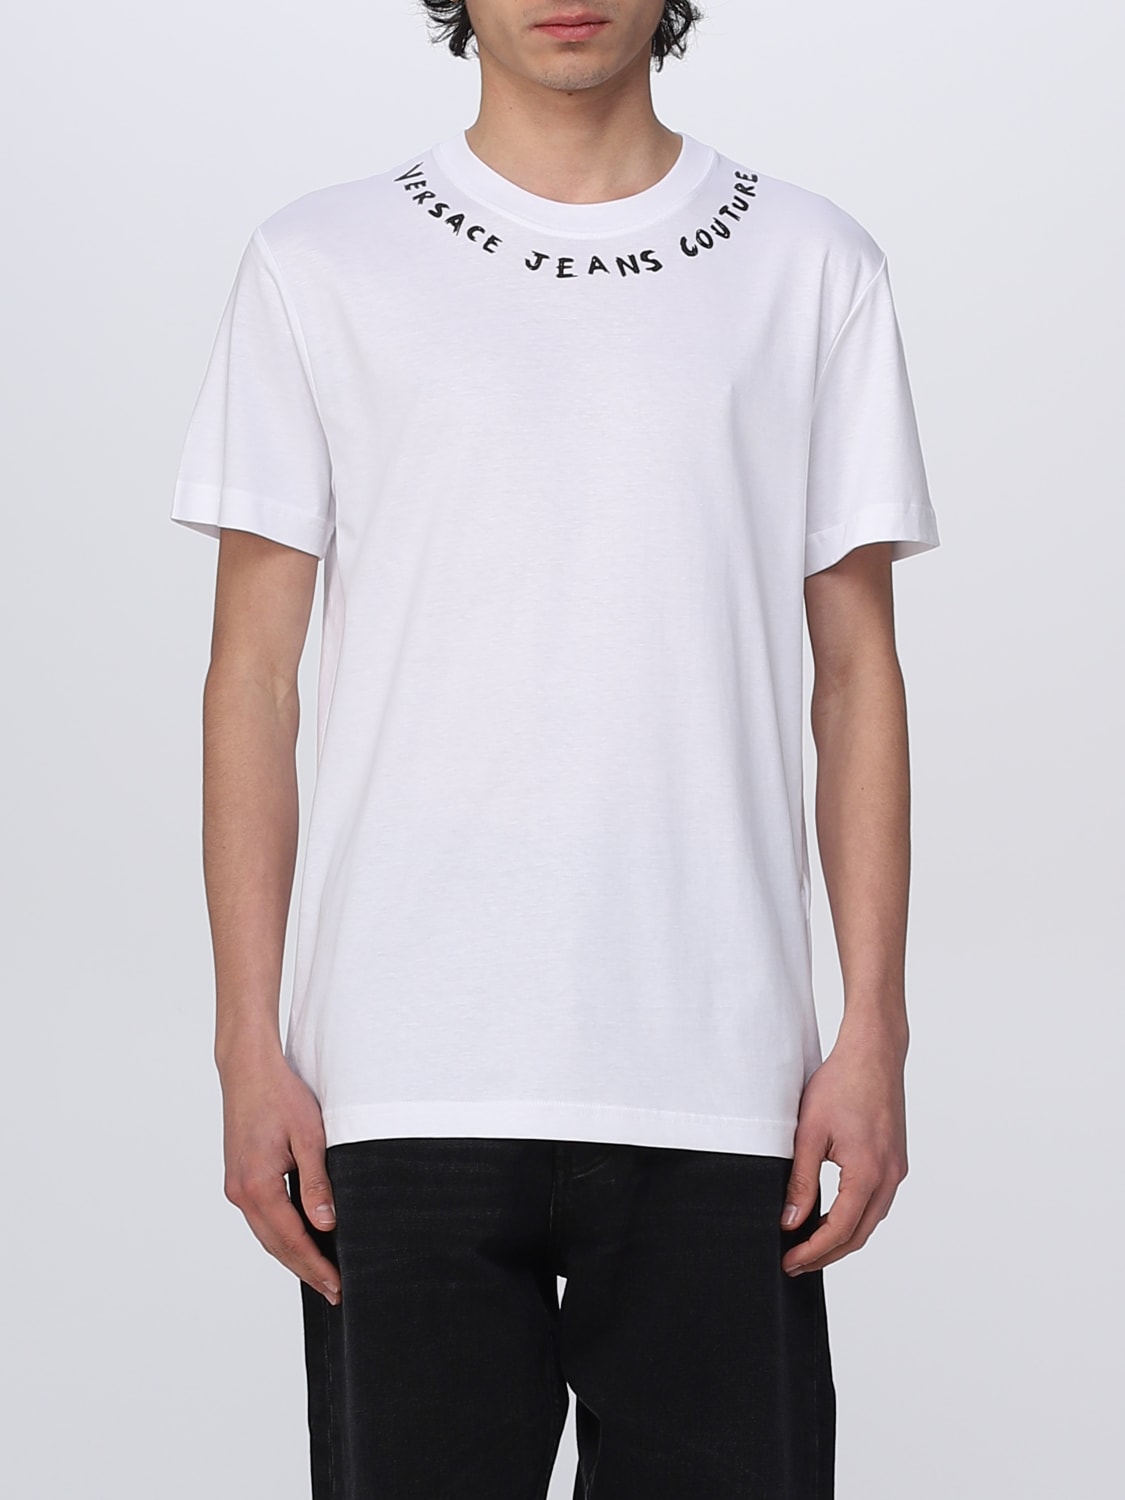 VERSACE JEANS COUTURE Tシャツ ホワイト XLサイズ | kensysgas.com